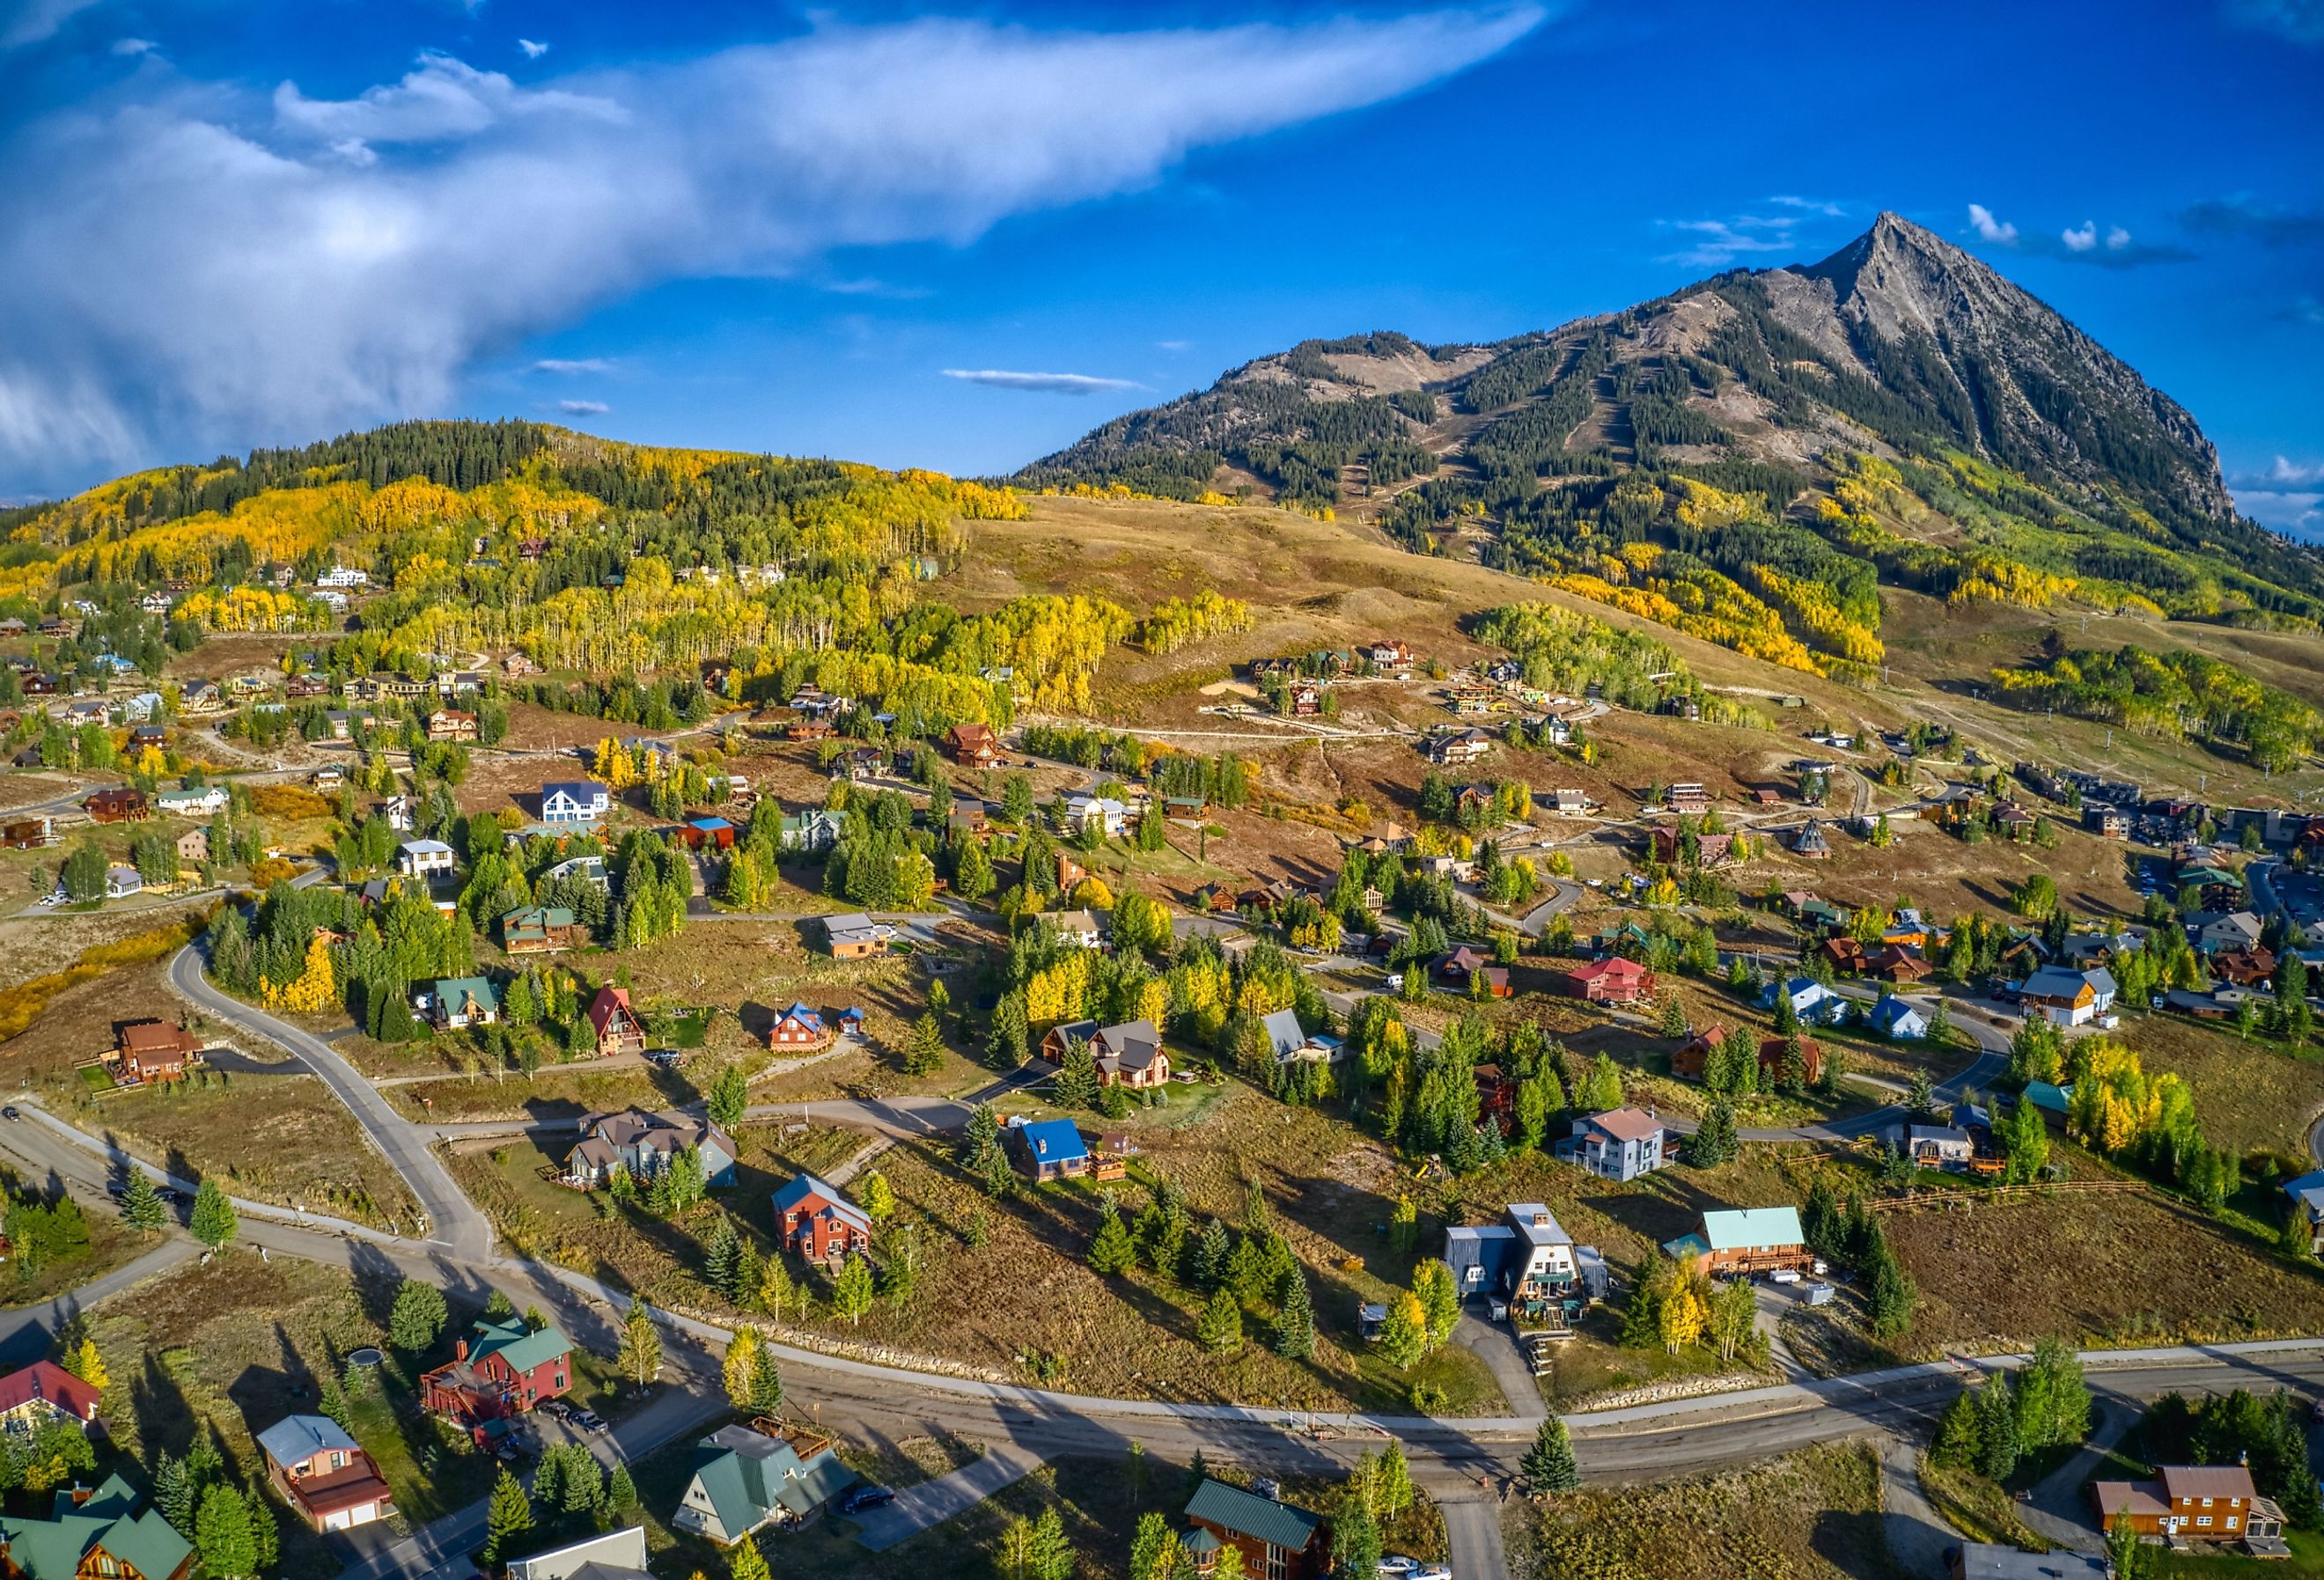 Aerial view of the popular ski town of Crested Butte, Colorado.